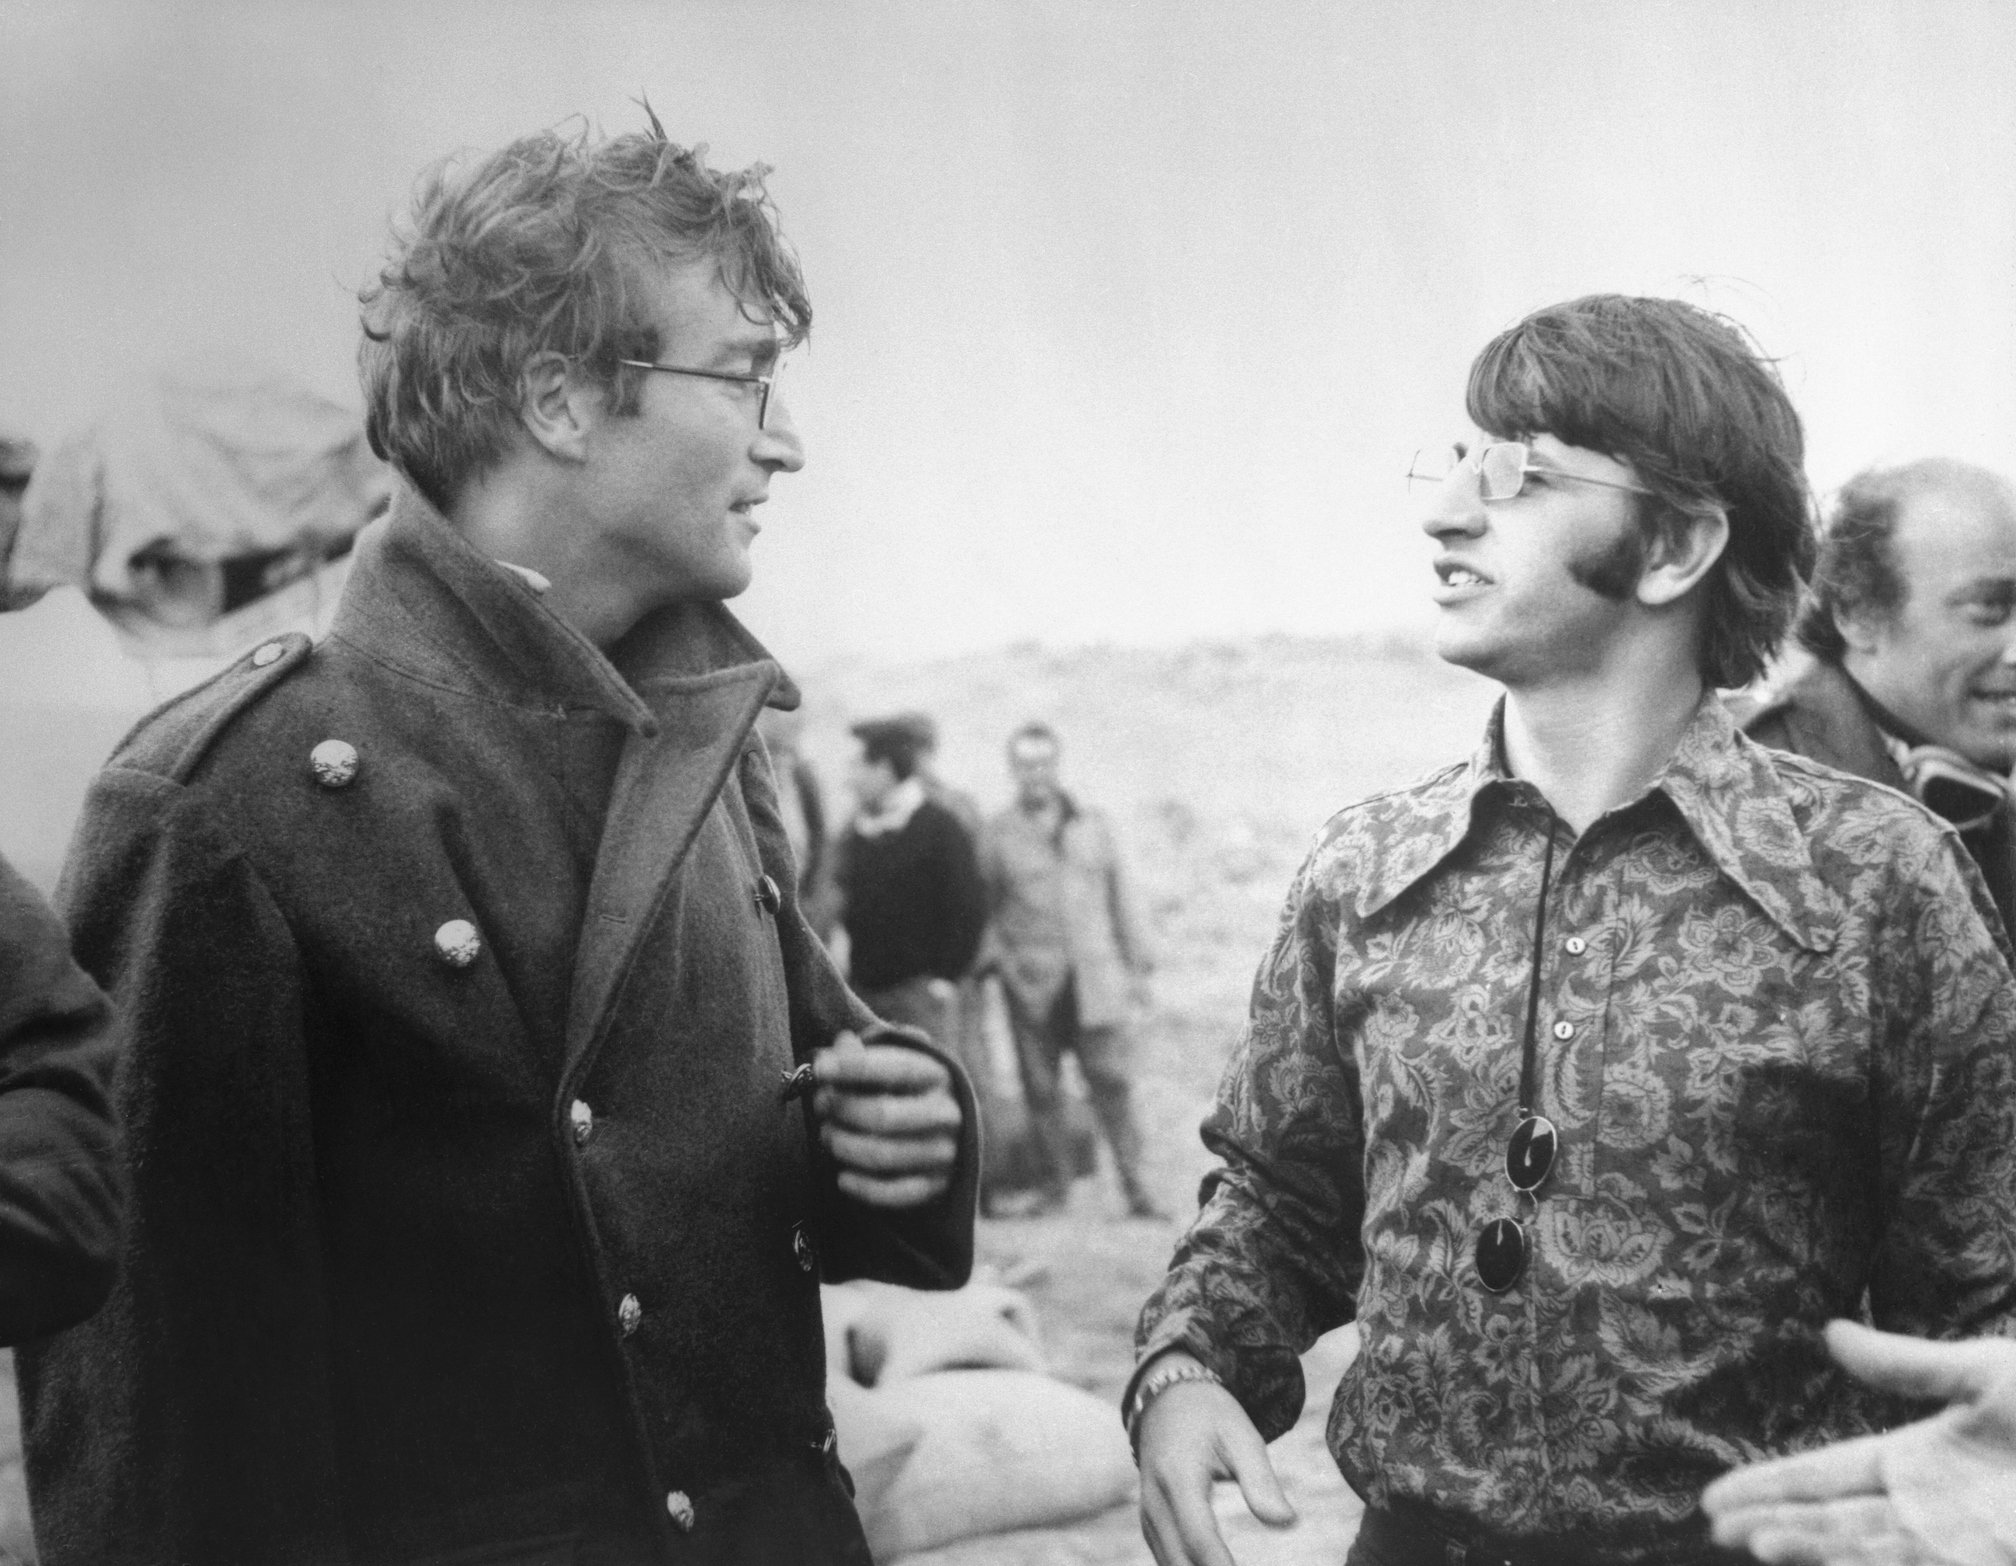 John Lennon chatting with Ringo Starr while on the set of How I Won the War